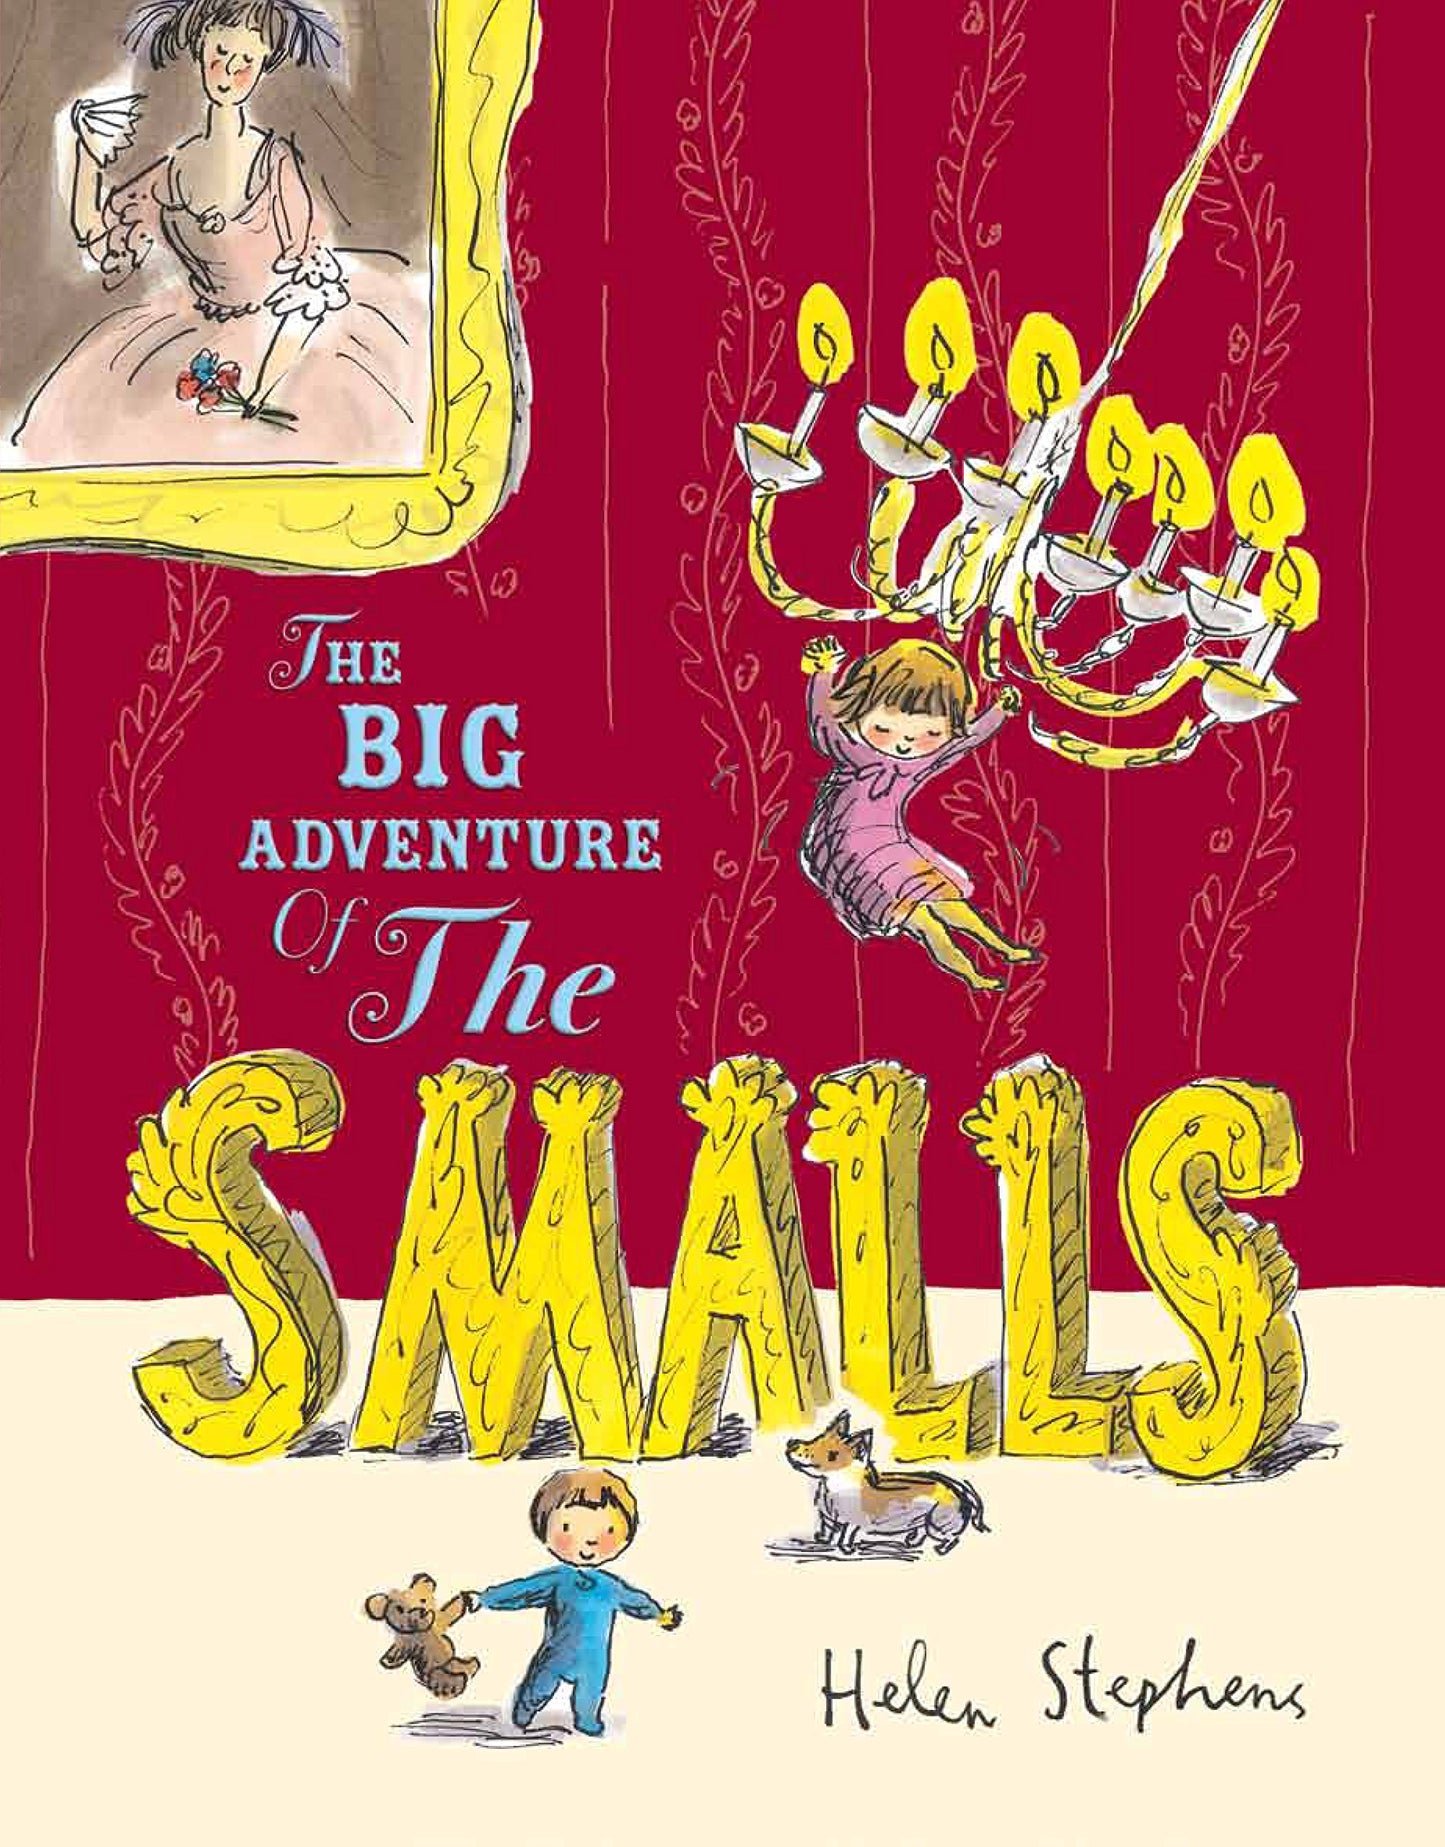 The Big Adventure of the Smalls by Helen Stephens